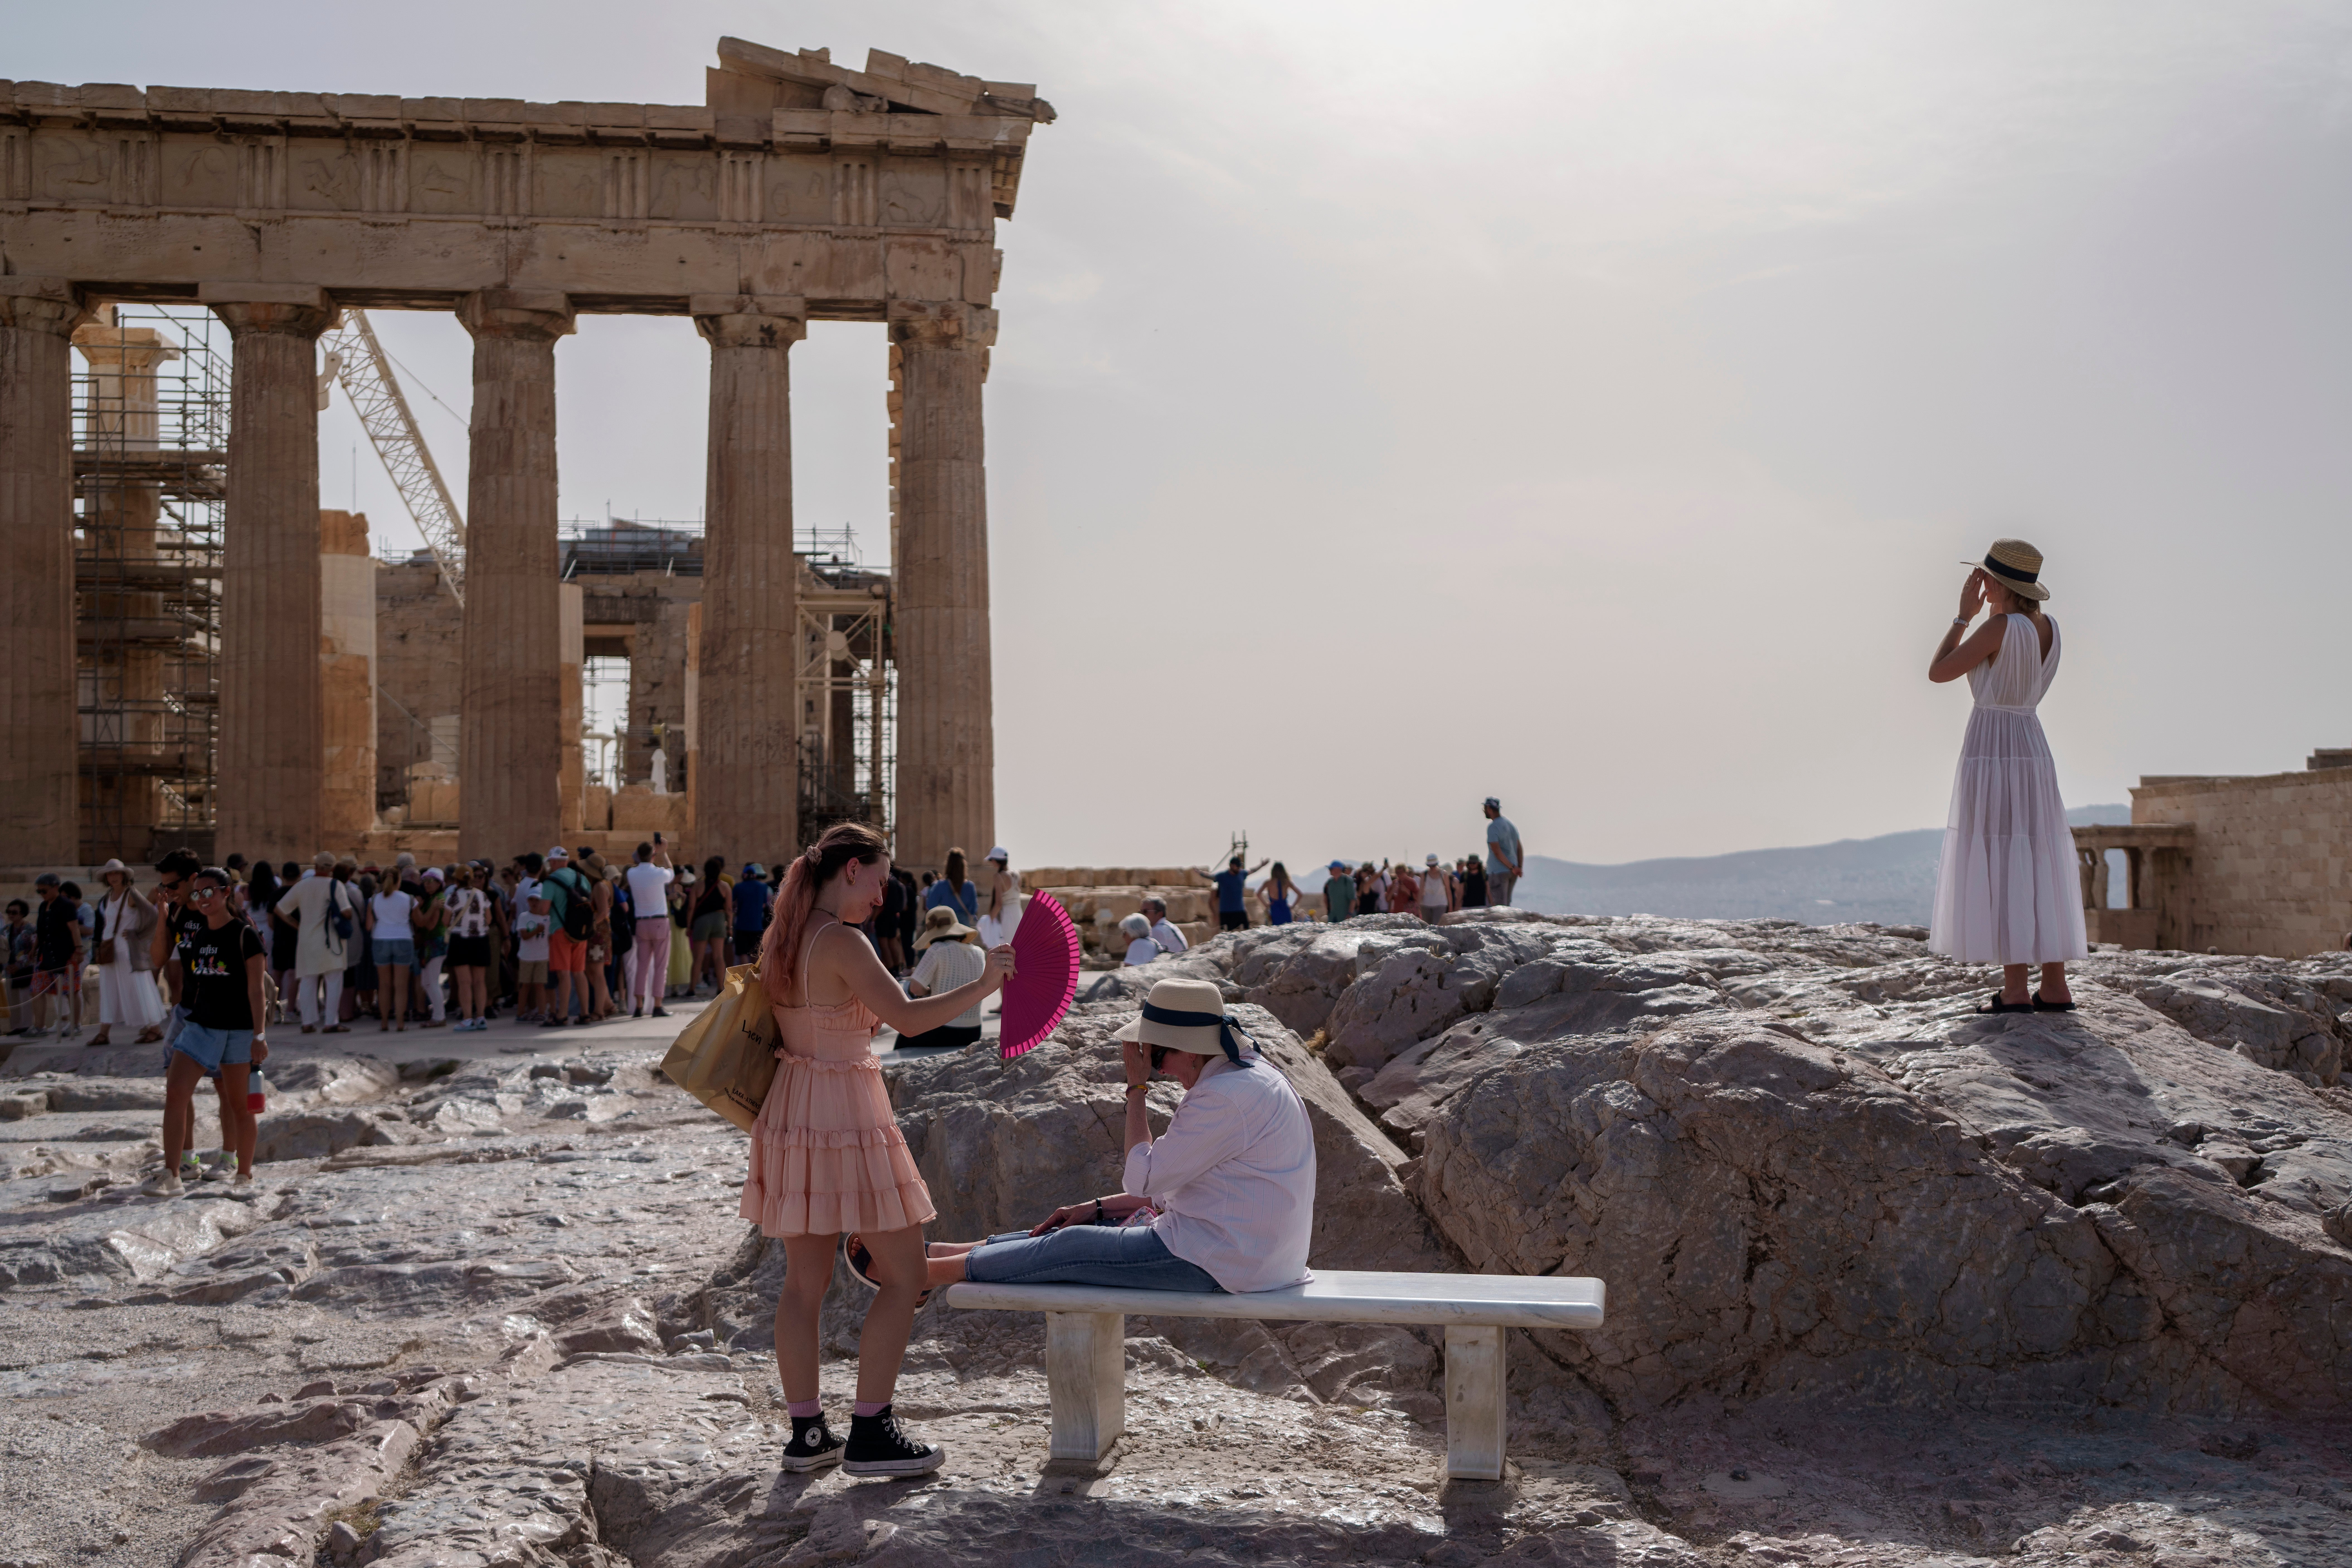 A tourist uses a hand fan to cool down another one sitting on a bench in front of the Parthenon at the ancient Acropolis, in Athens